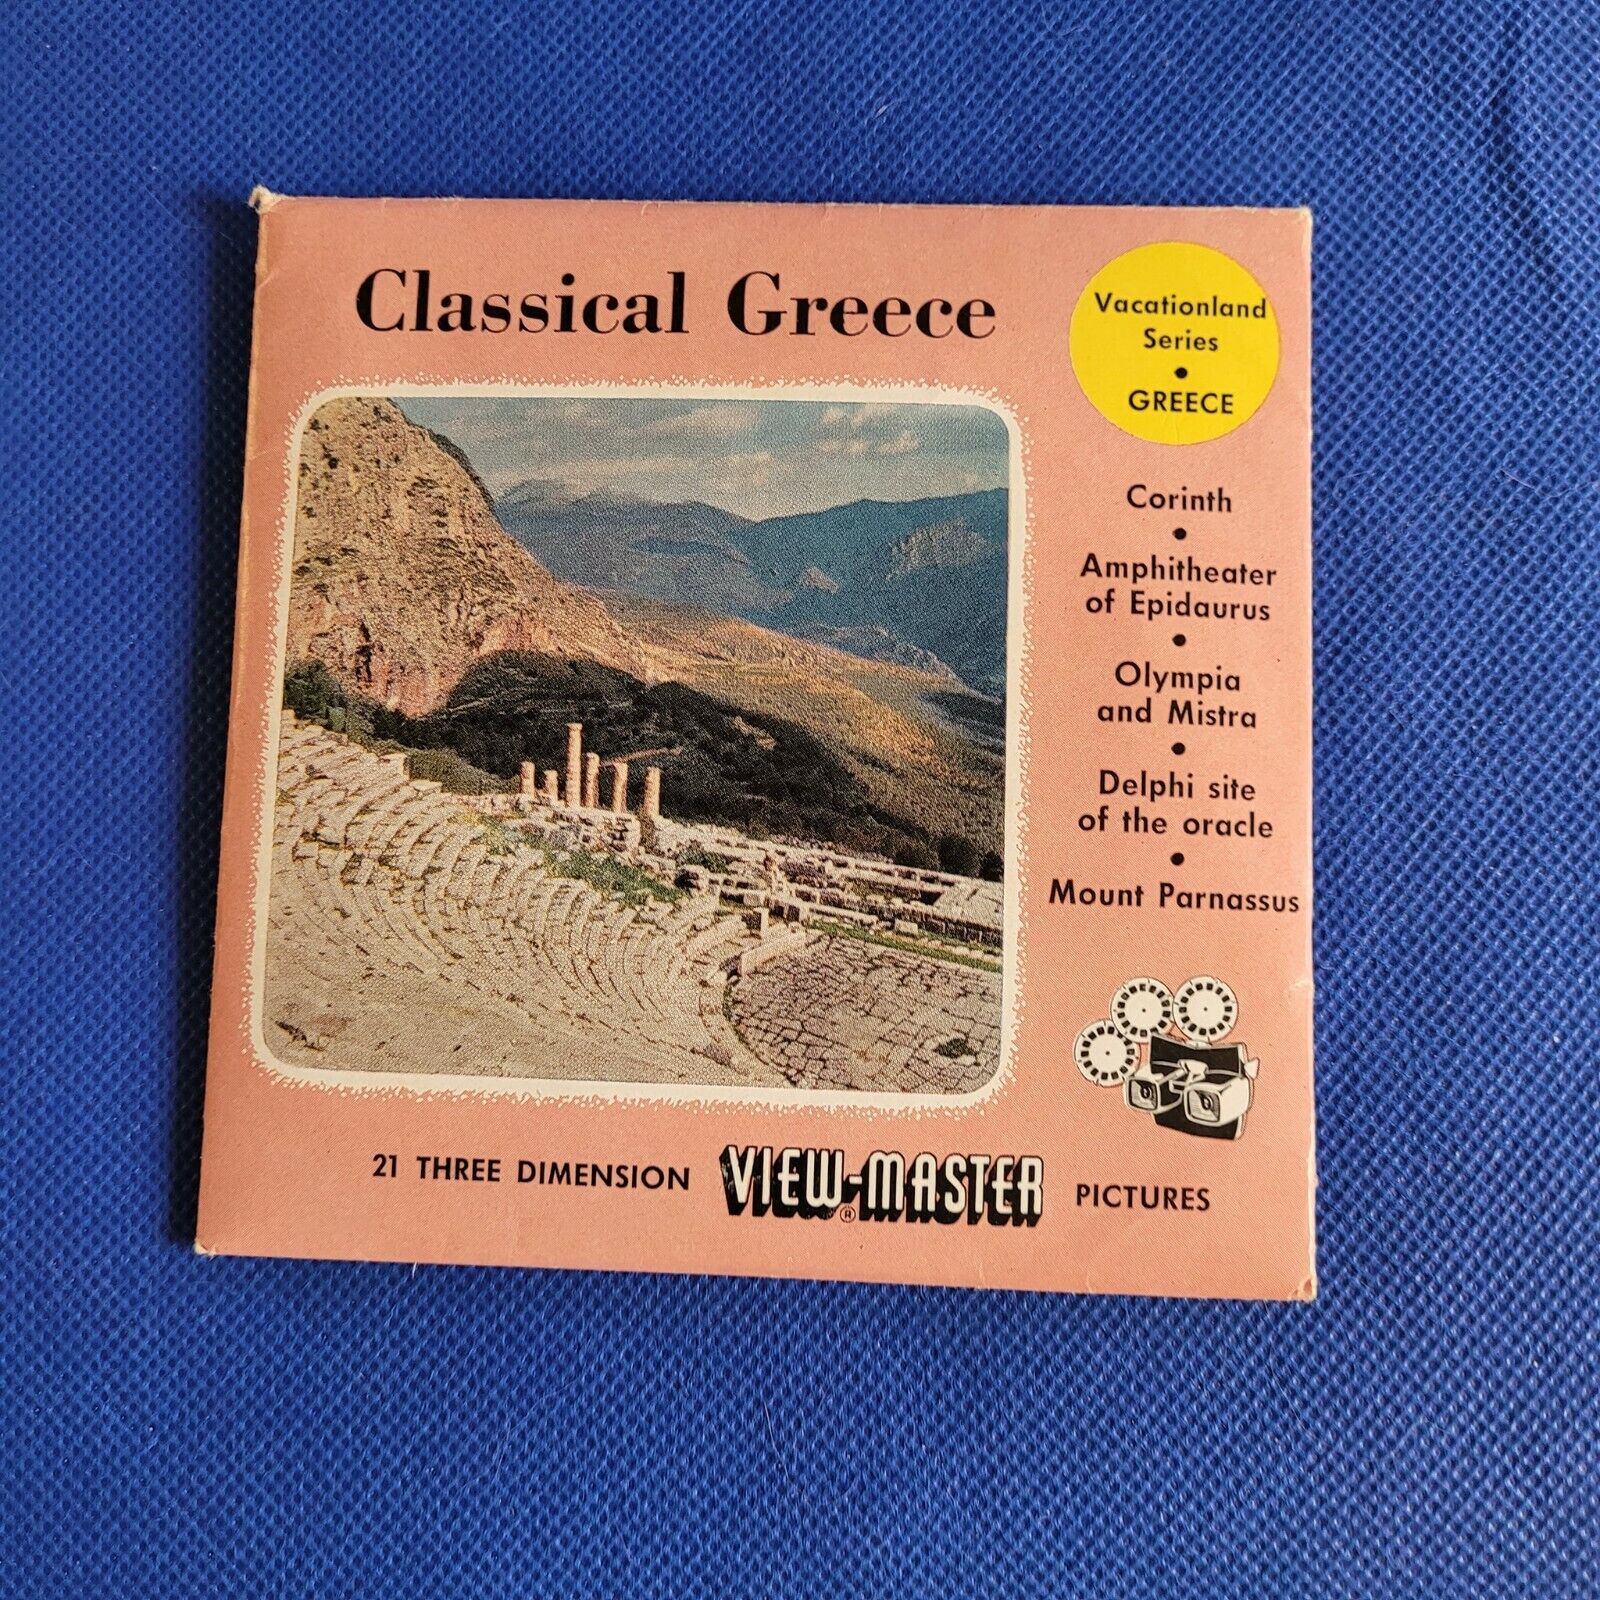 1955 Sawyer's Classical Greece 2157 C0032 C0033 view-master 3 Reels Packet 